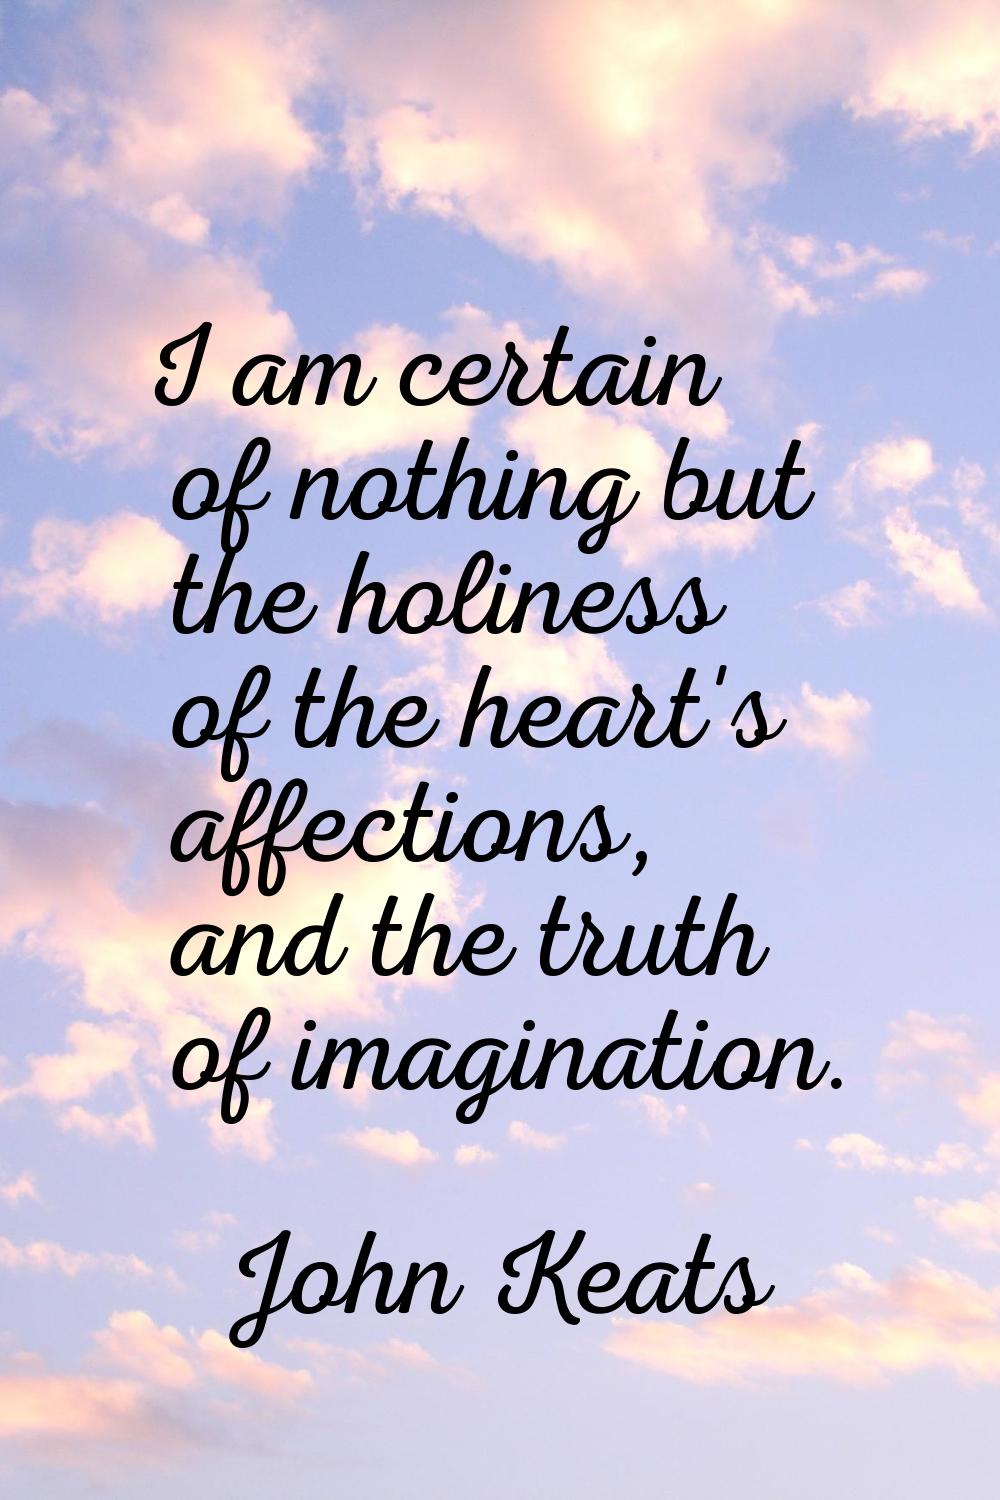 I am certain of nothing but the holiness of the heart's affections, and the truth of imagination.